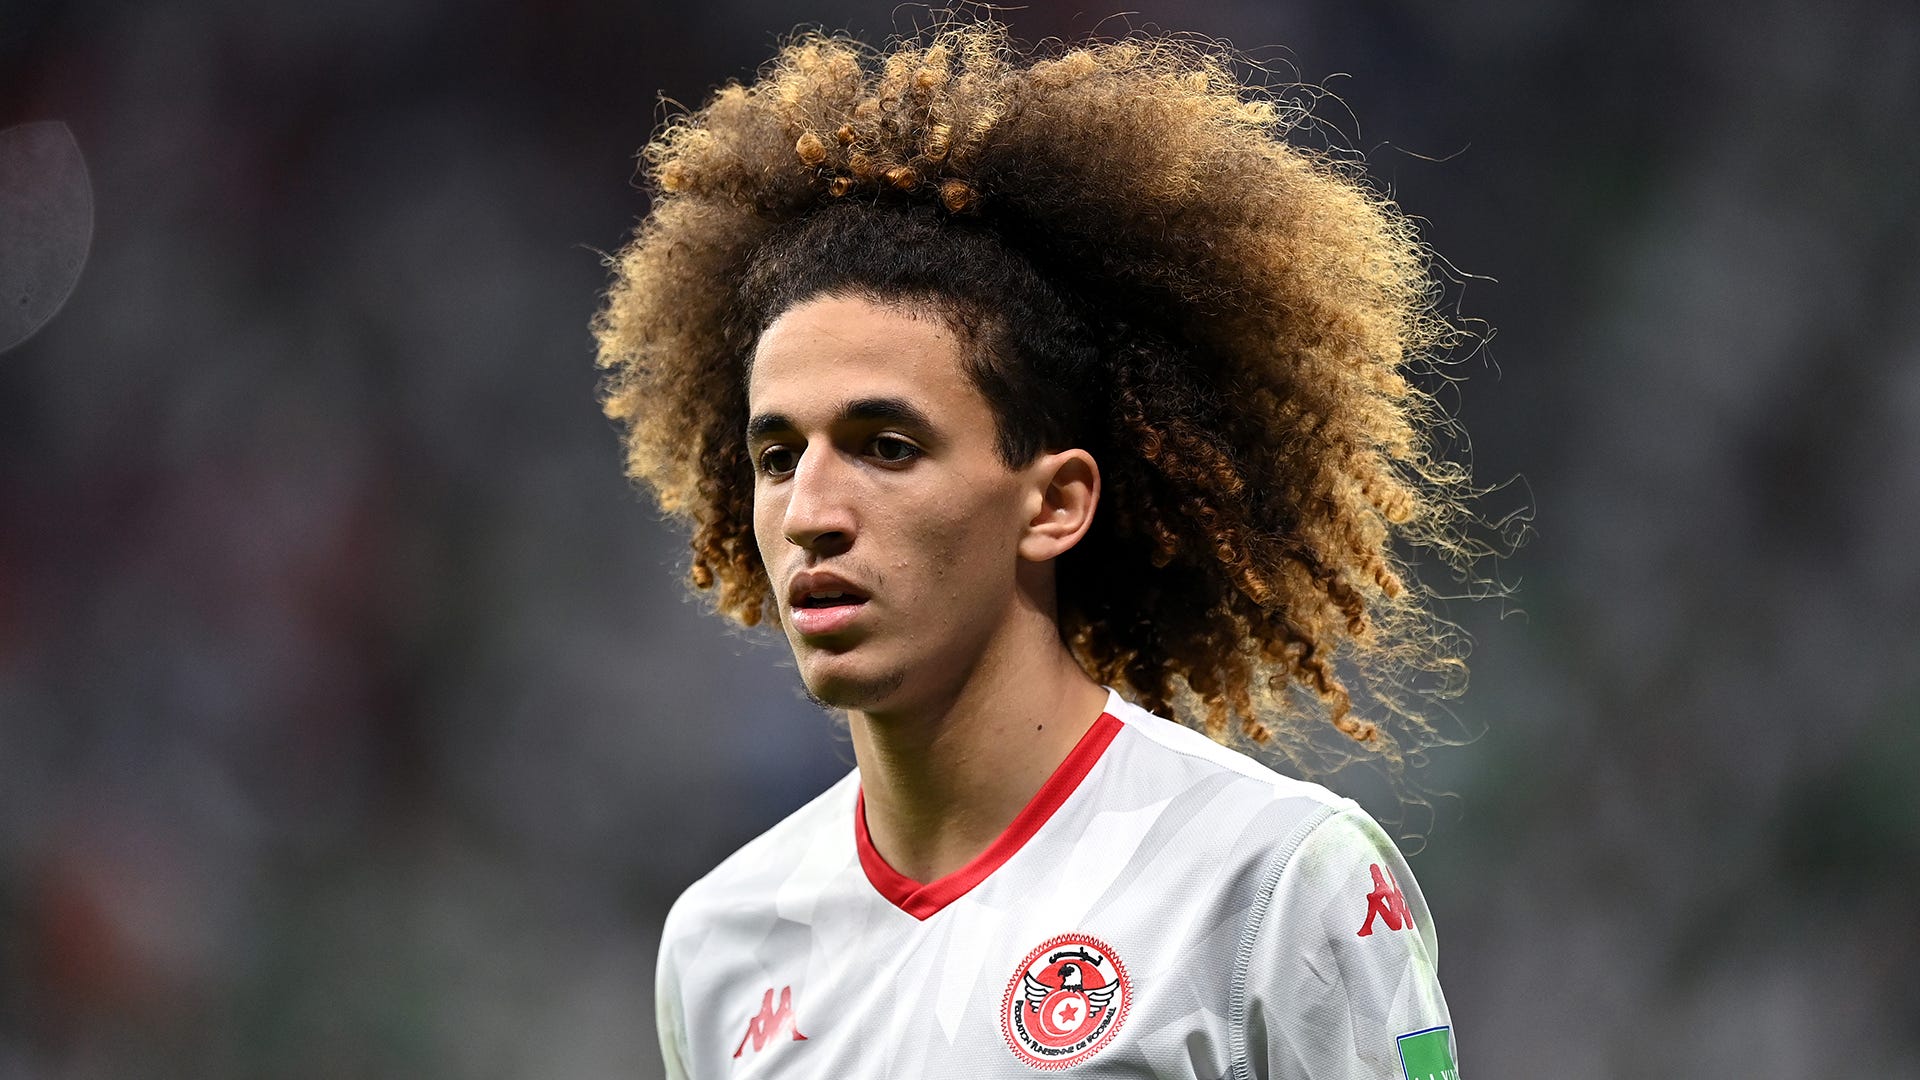 A highly talented player' – What are Man Utd's plans for Tunisia golden boy  Mejbri? | Goal.com